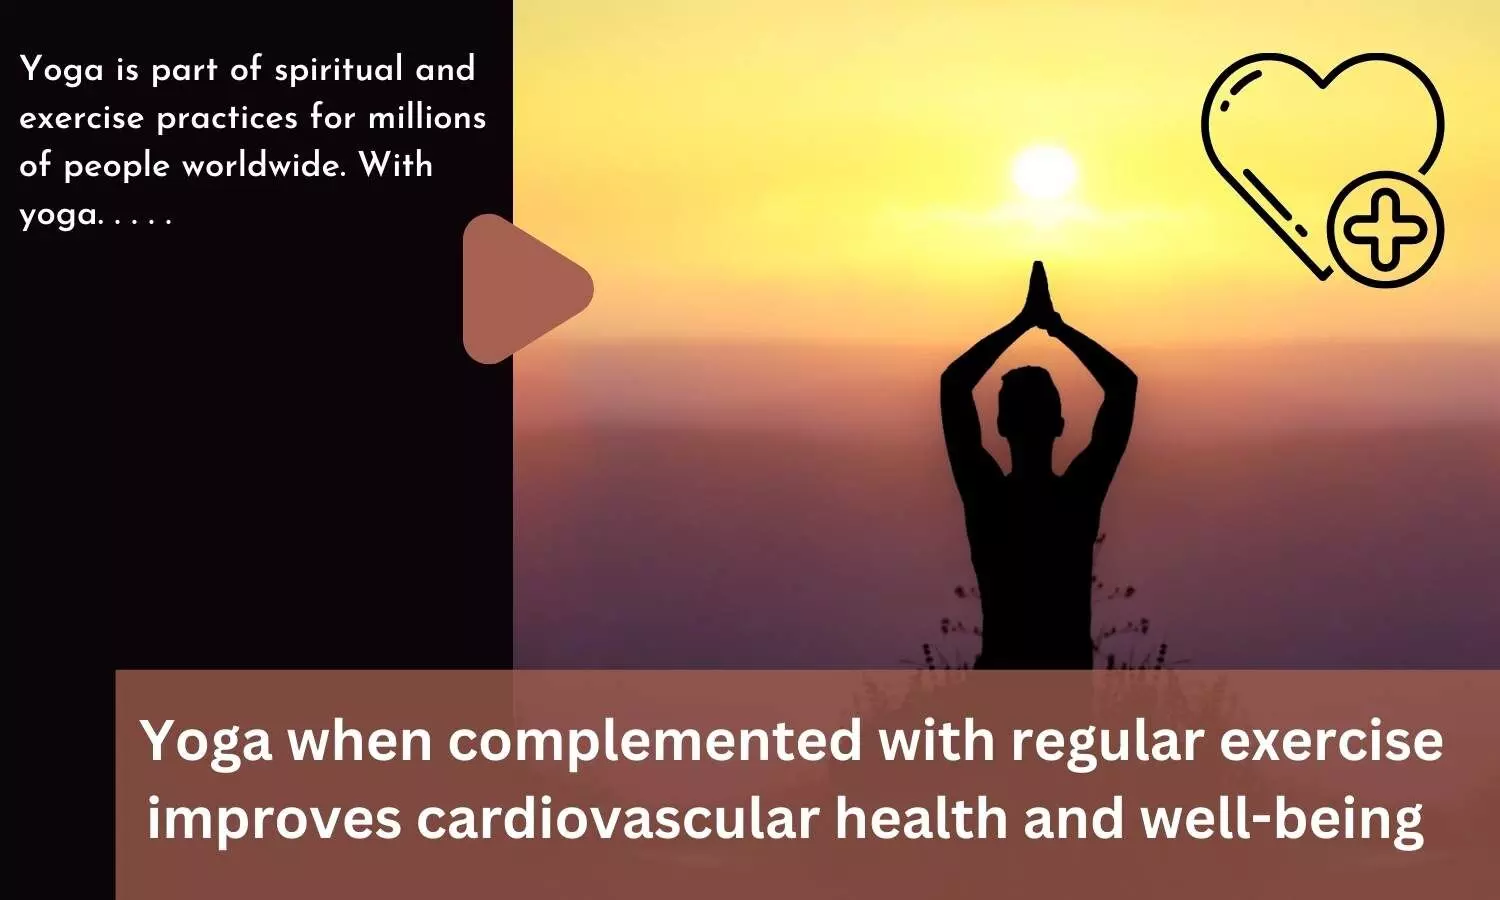 Yoga when complemented with regular exercise improves cardiovascular health and well-being